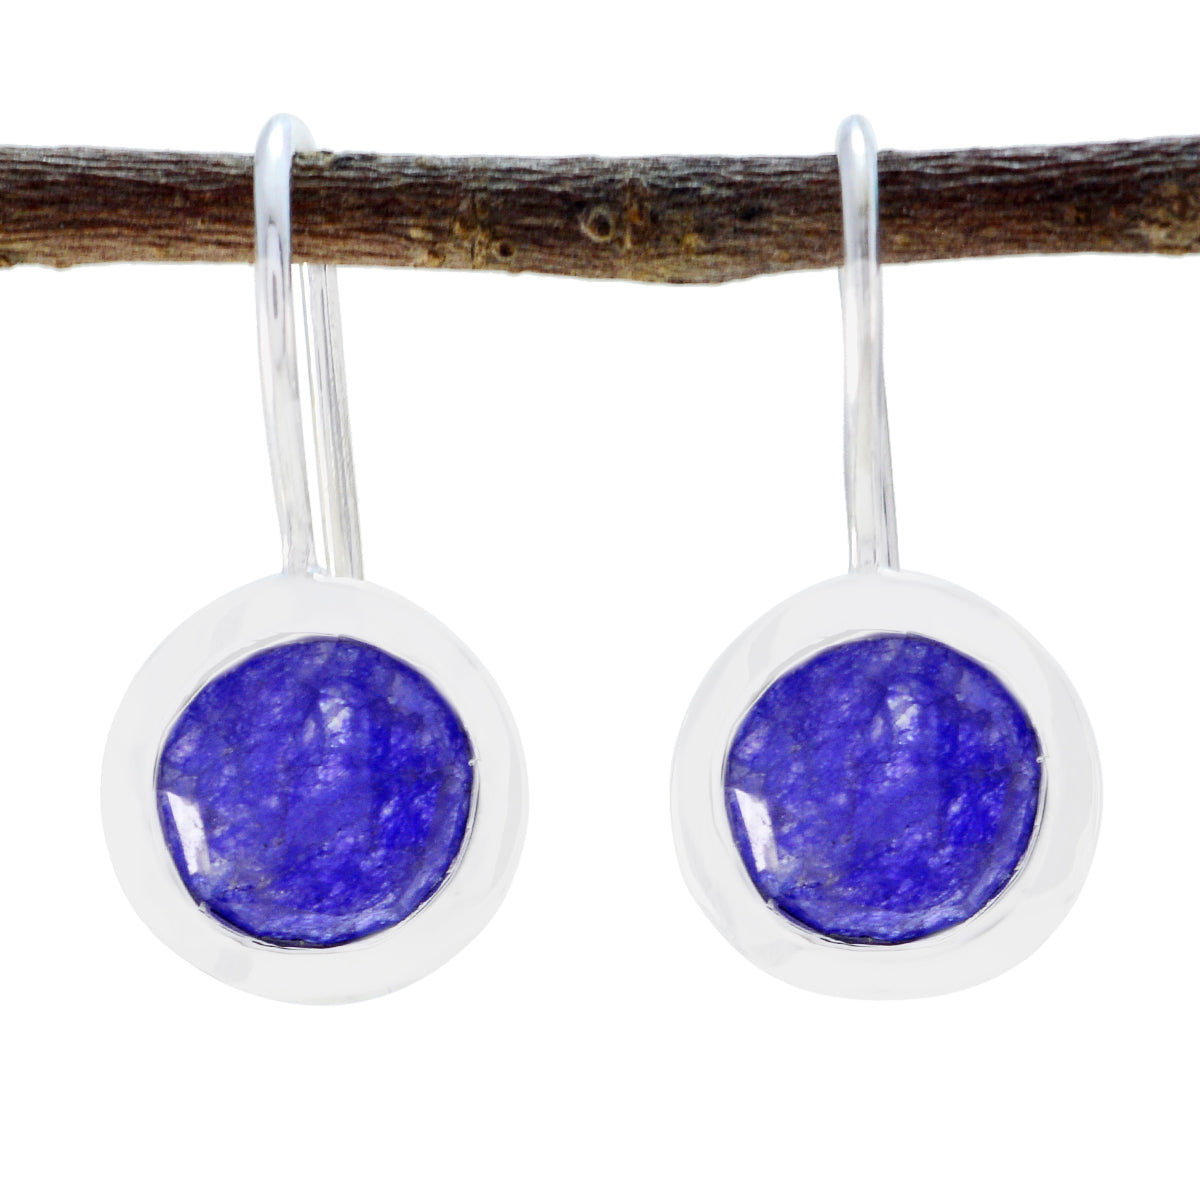 Riyo Real Gemstones round Faceted Nevy Blue Indian Shappire Silver Earring independence gift